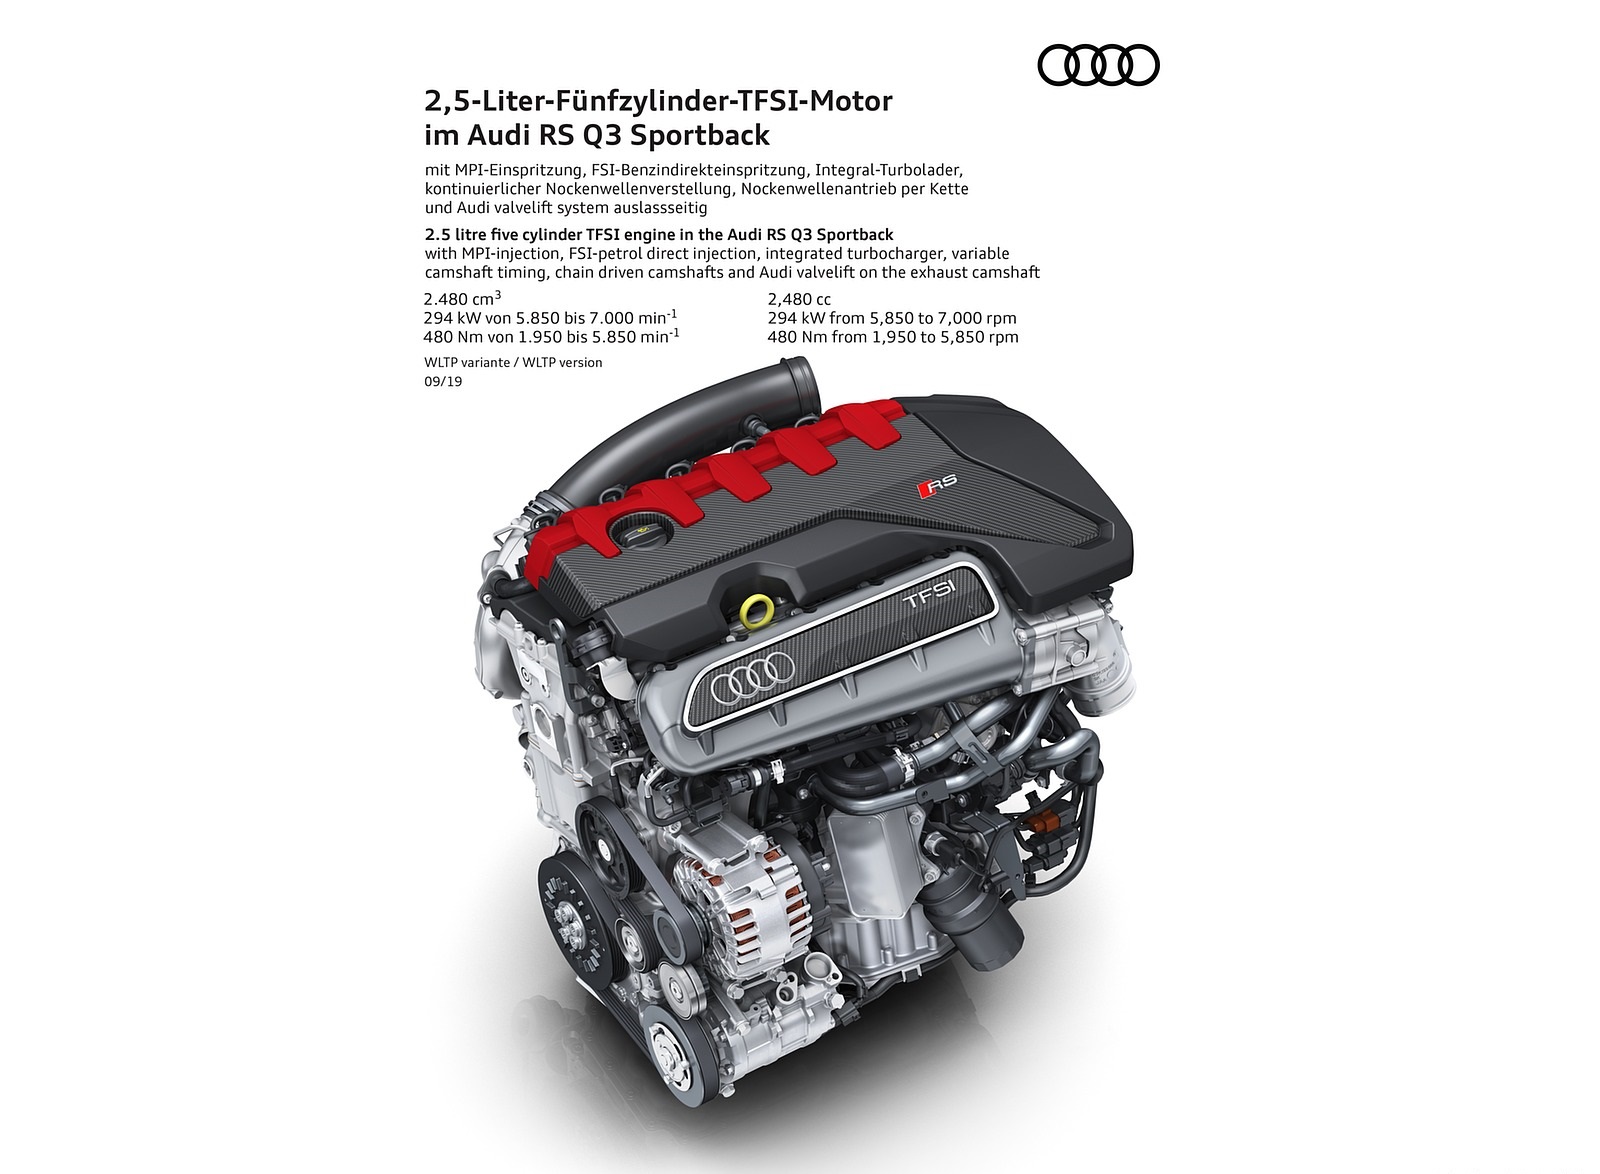 2020 Audi RS Q3 Sportback 2.5 litre five cylinder TFSI engine in the Audi RS Q3 Sportback Wallpapers #118 of 127